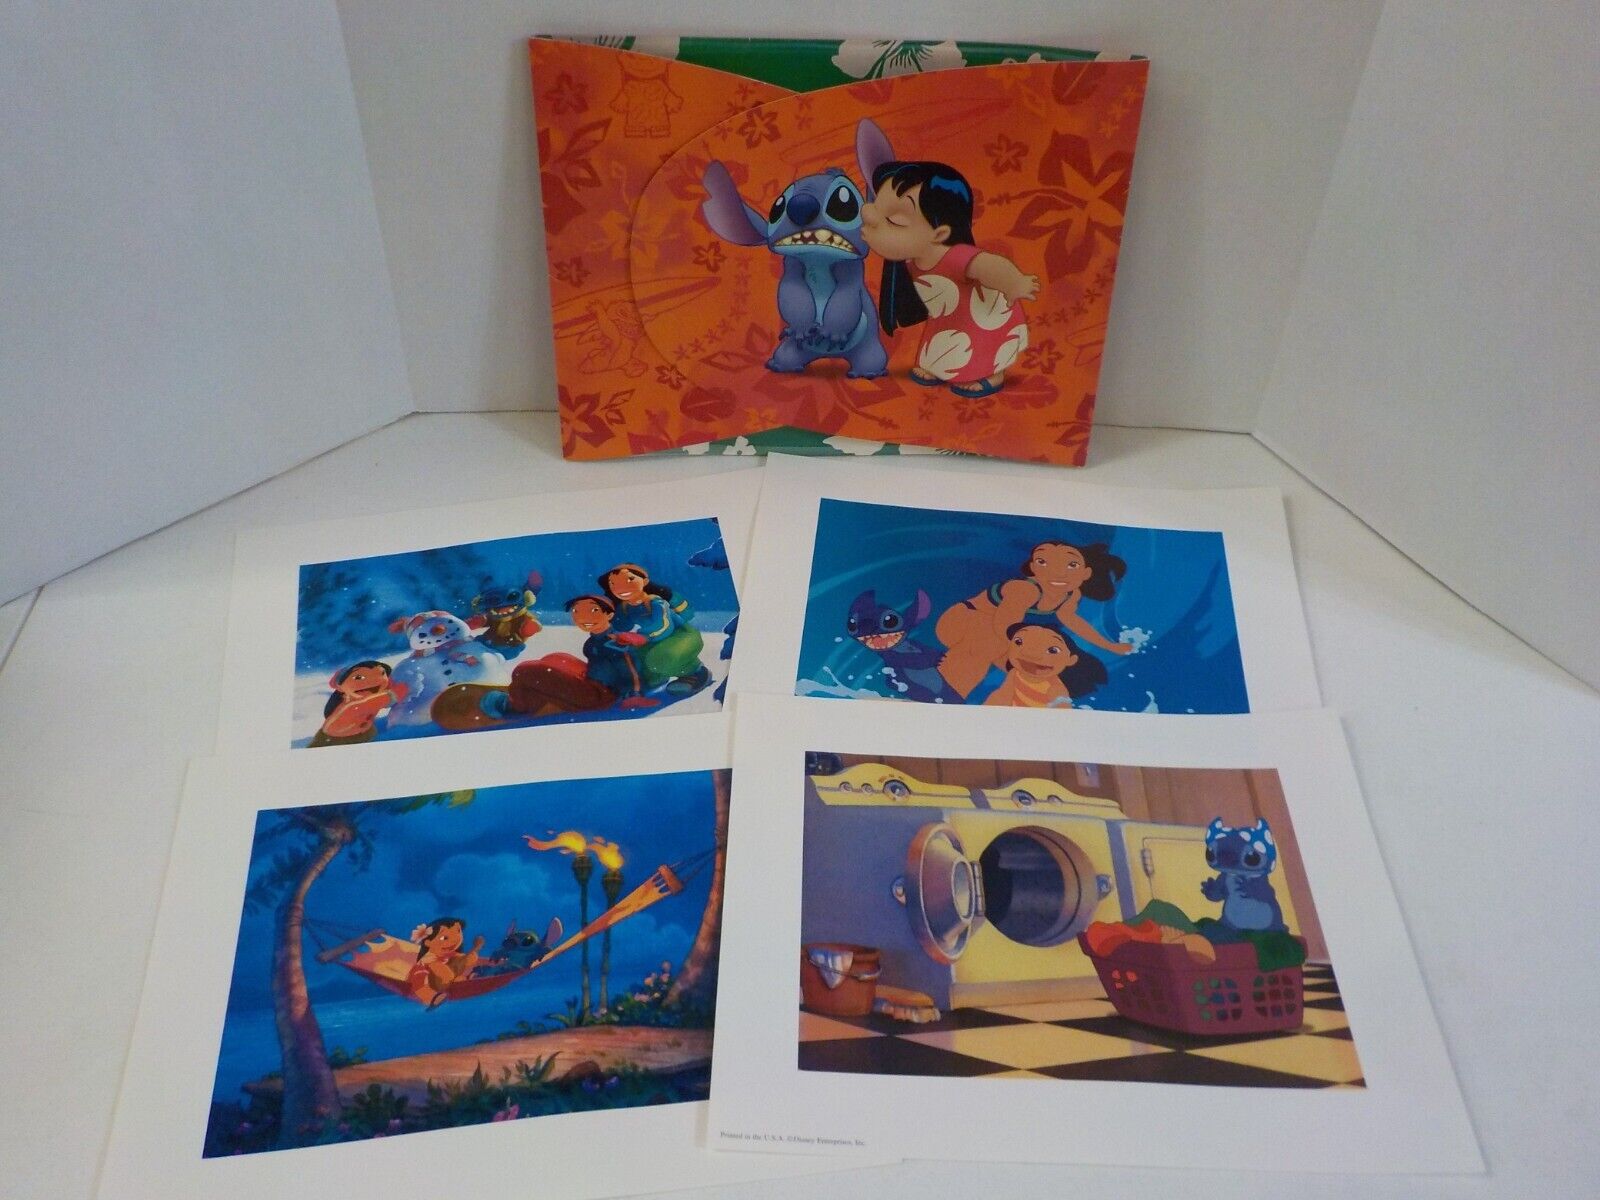 N G0112 2002 Lilo & Stitch ~ Disney Store Exclusive Lithographs ~ Set of 4